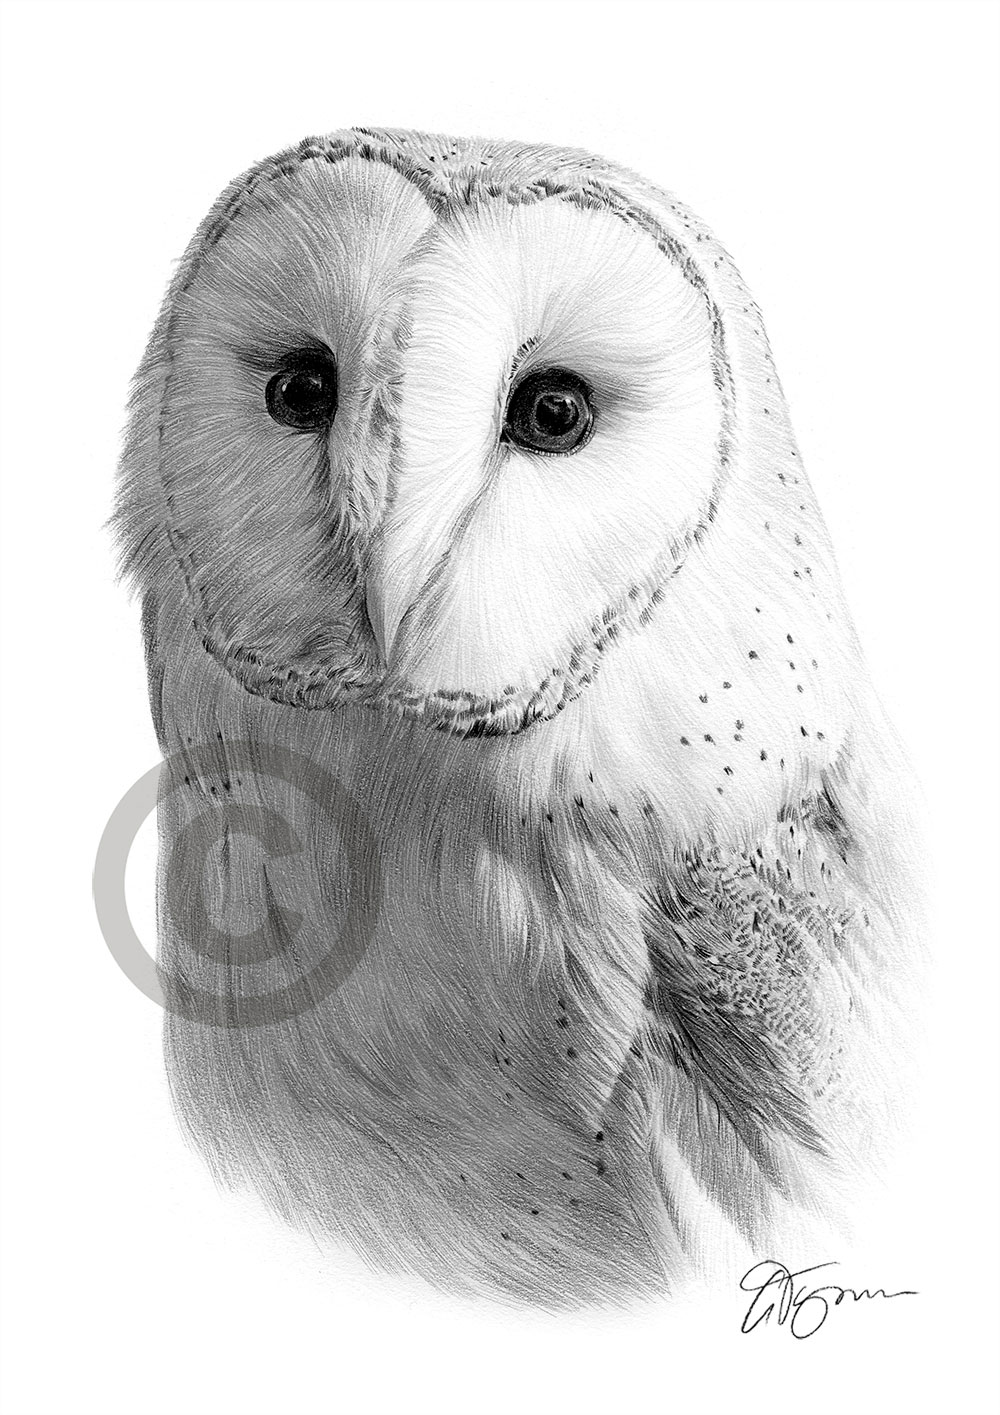 Learn How to Draw a Snowy Owl in Pen and Ink